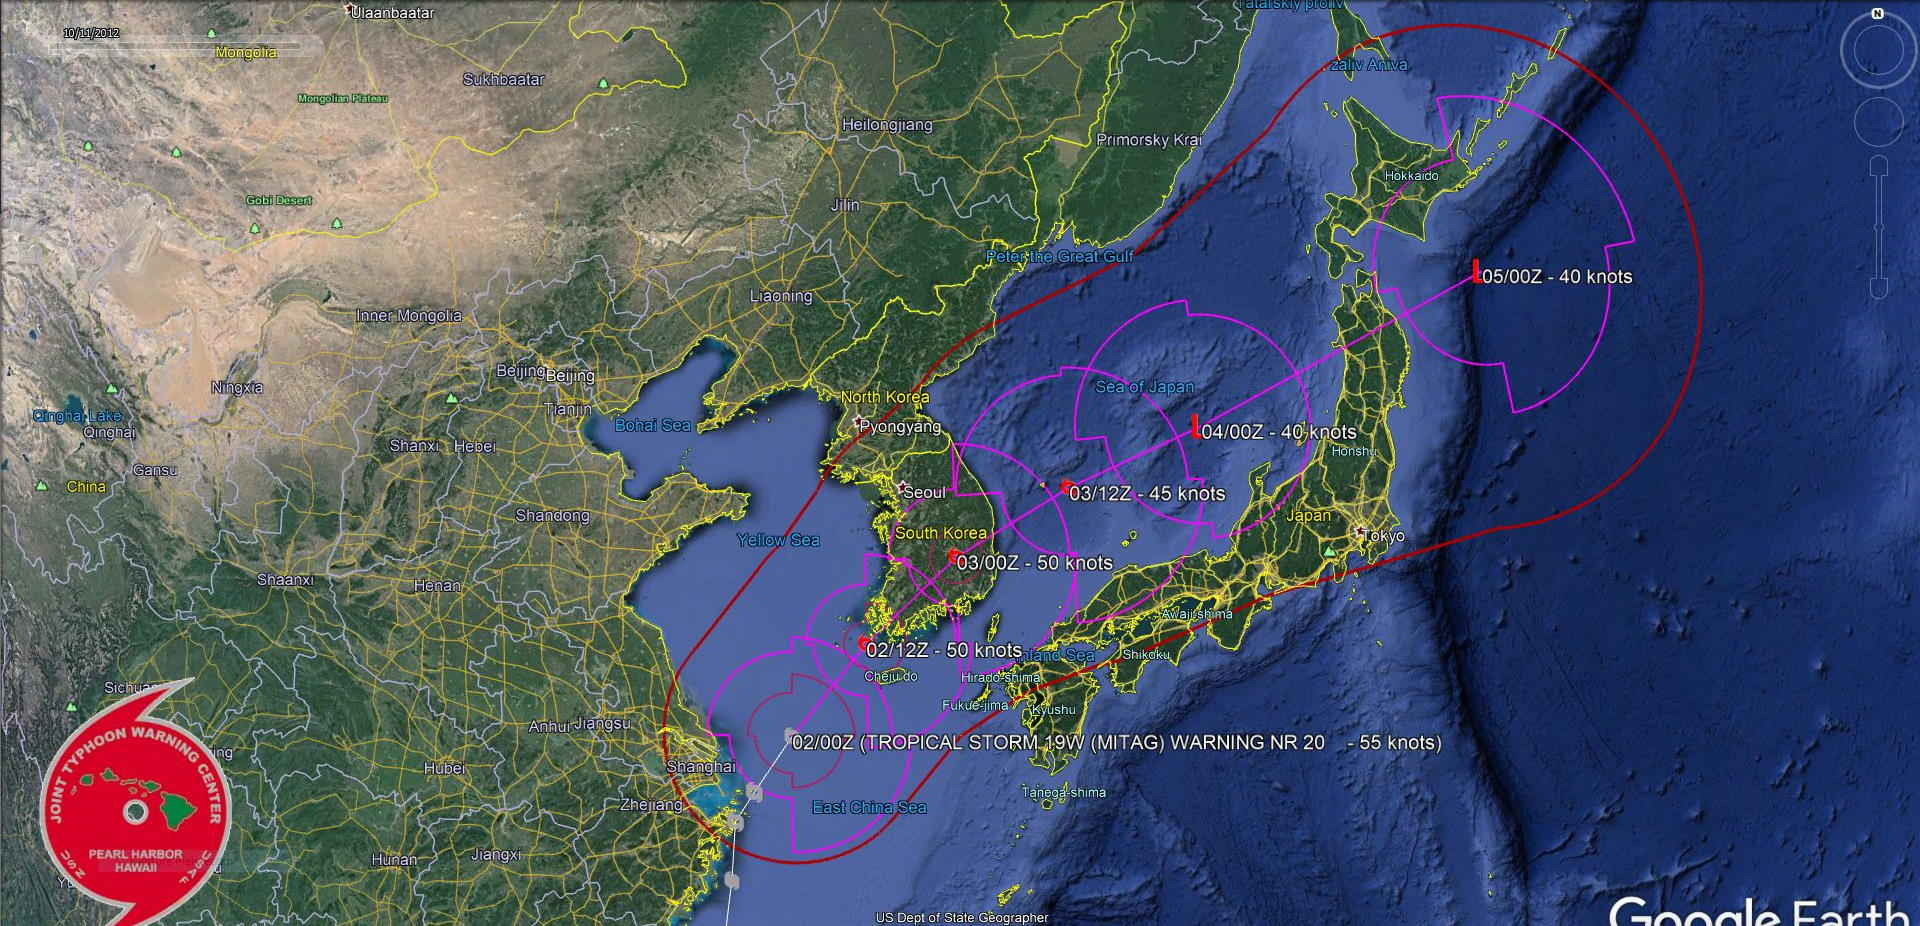 Tropical storm Mitag(19W): landfall over South Korea within 12hours